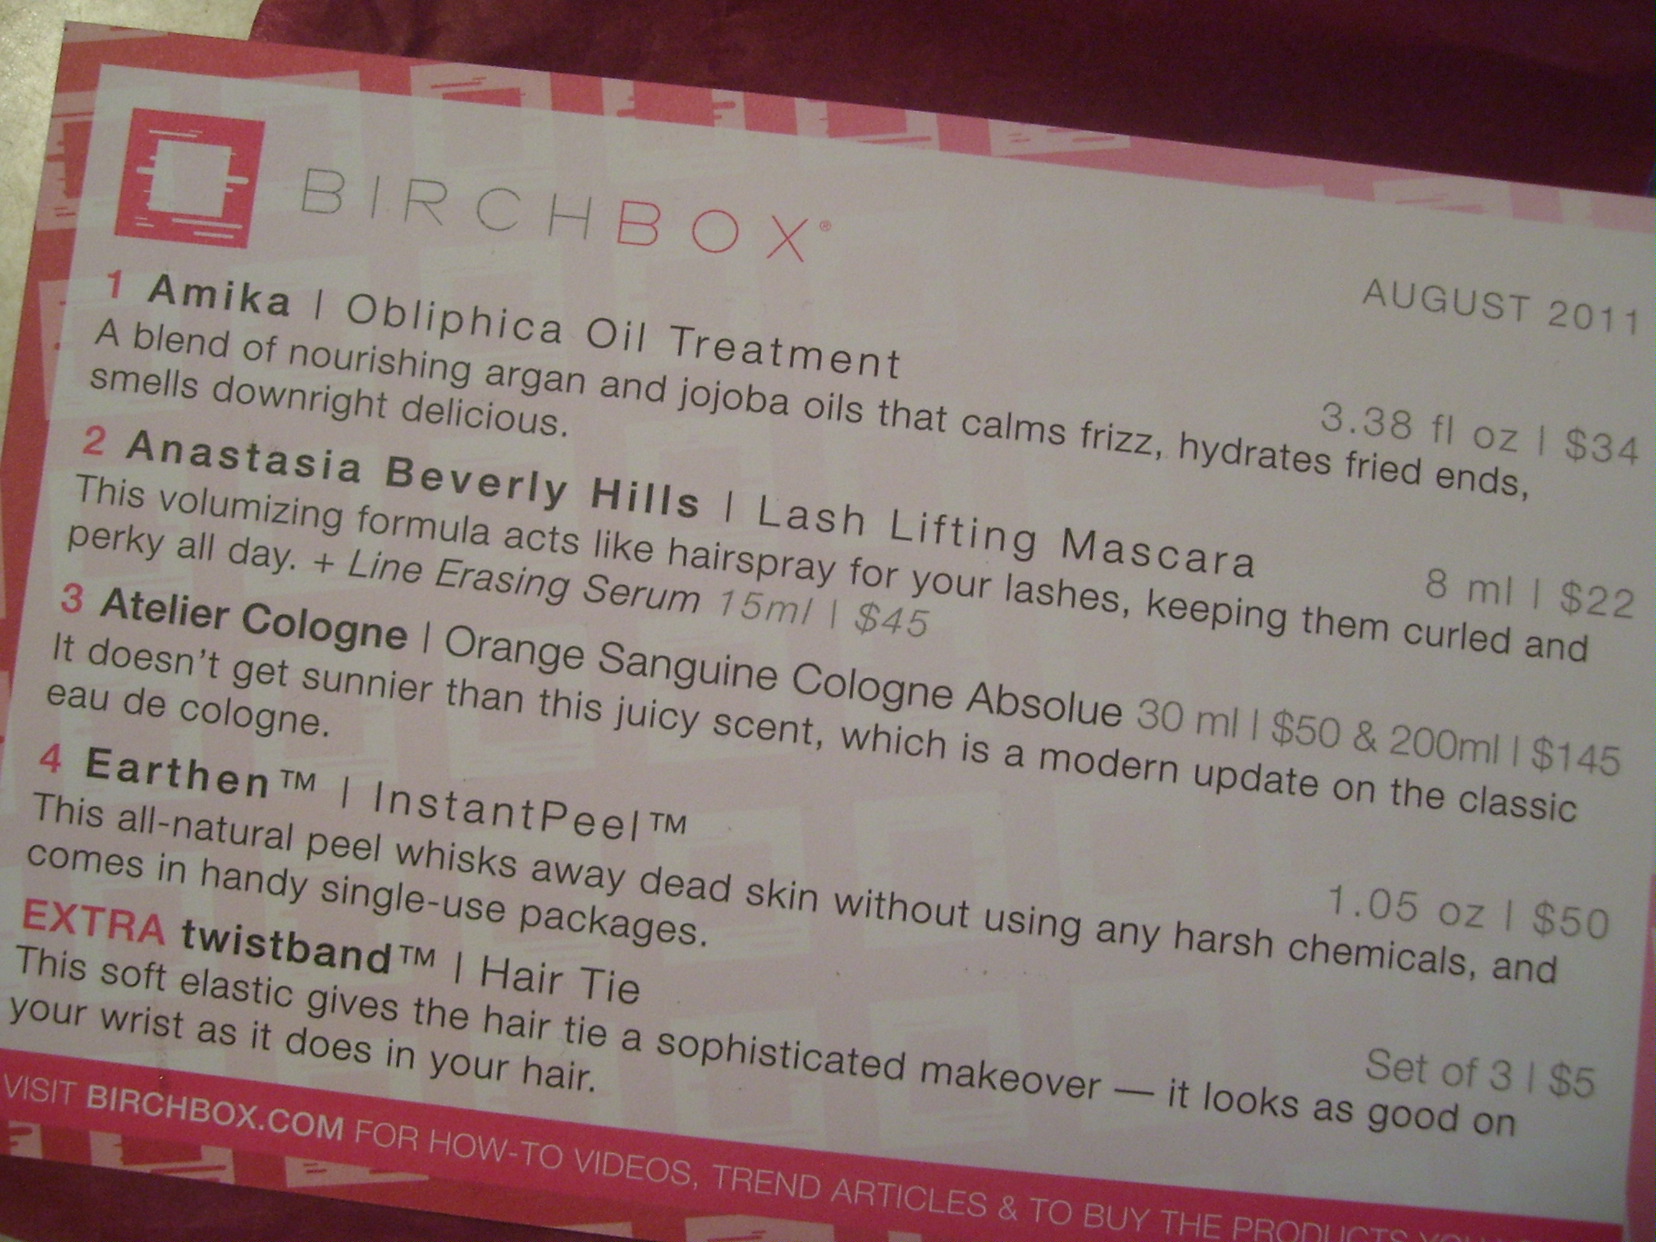 Final Thoughts on My August 2011 Birchbox Products